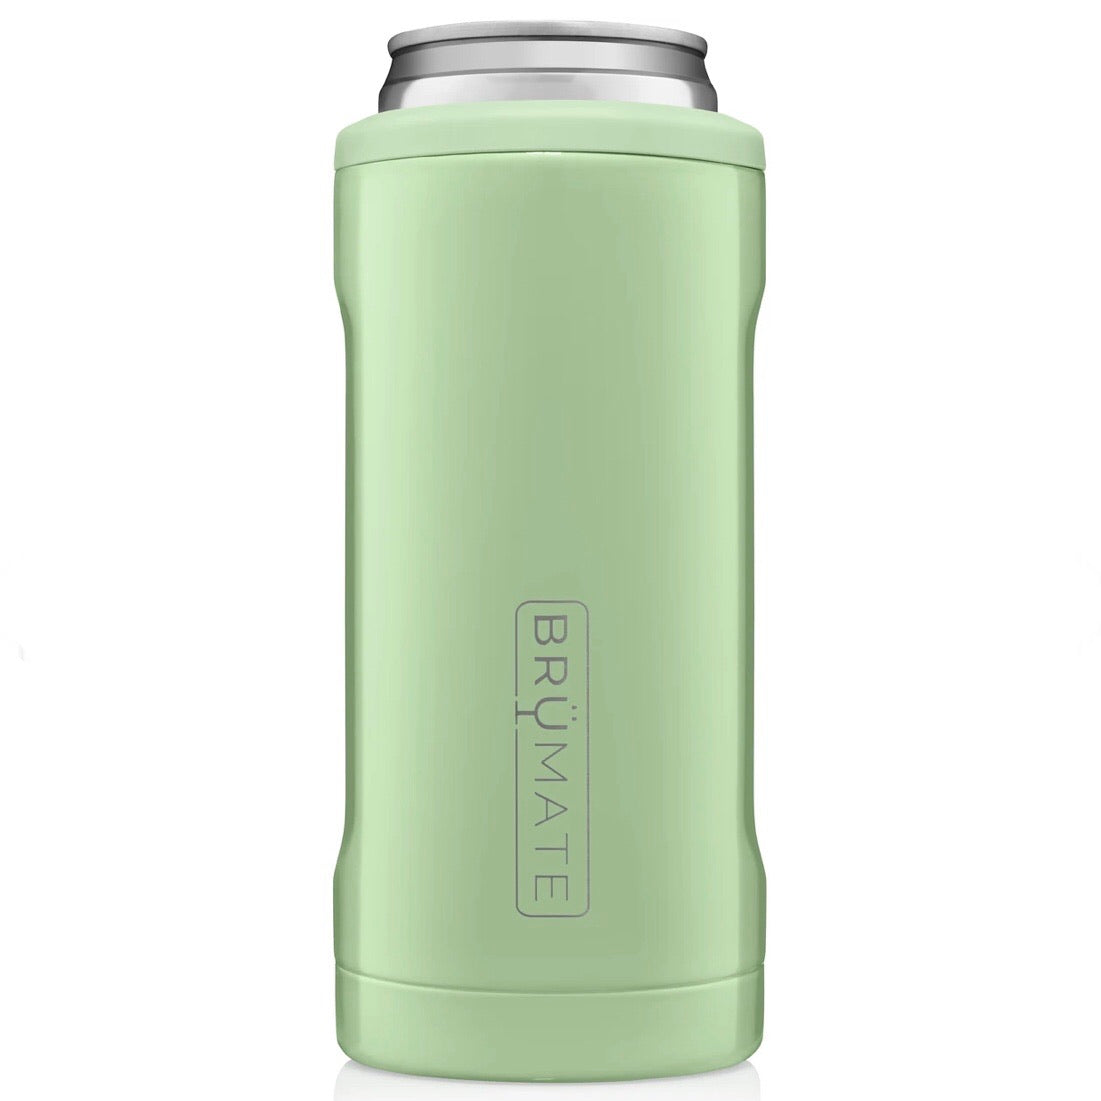 slim cans leak-proof drinkware hot to cold insulated drinkware tumbler like yeti brumate spillproof mint